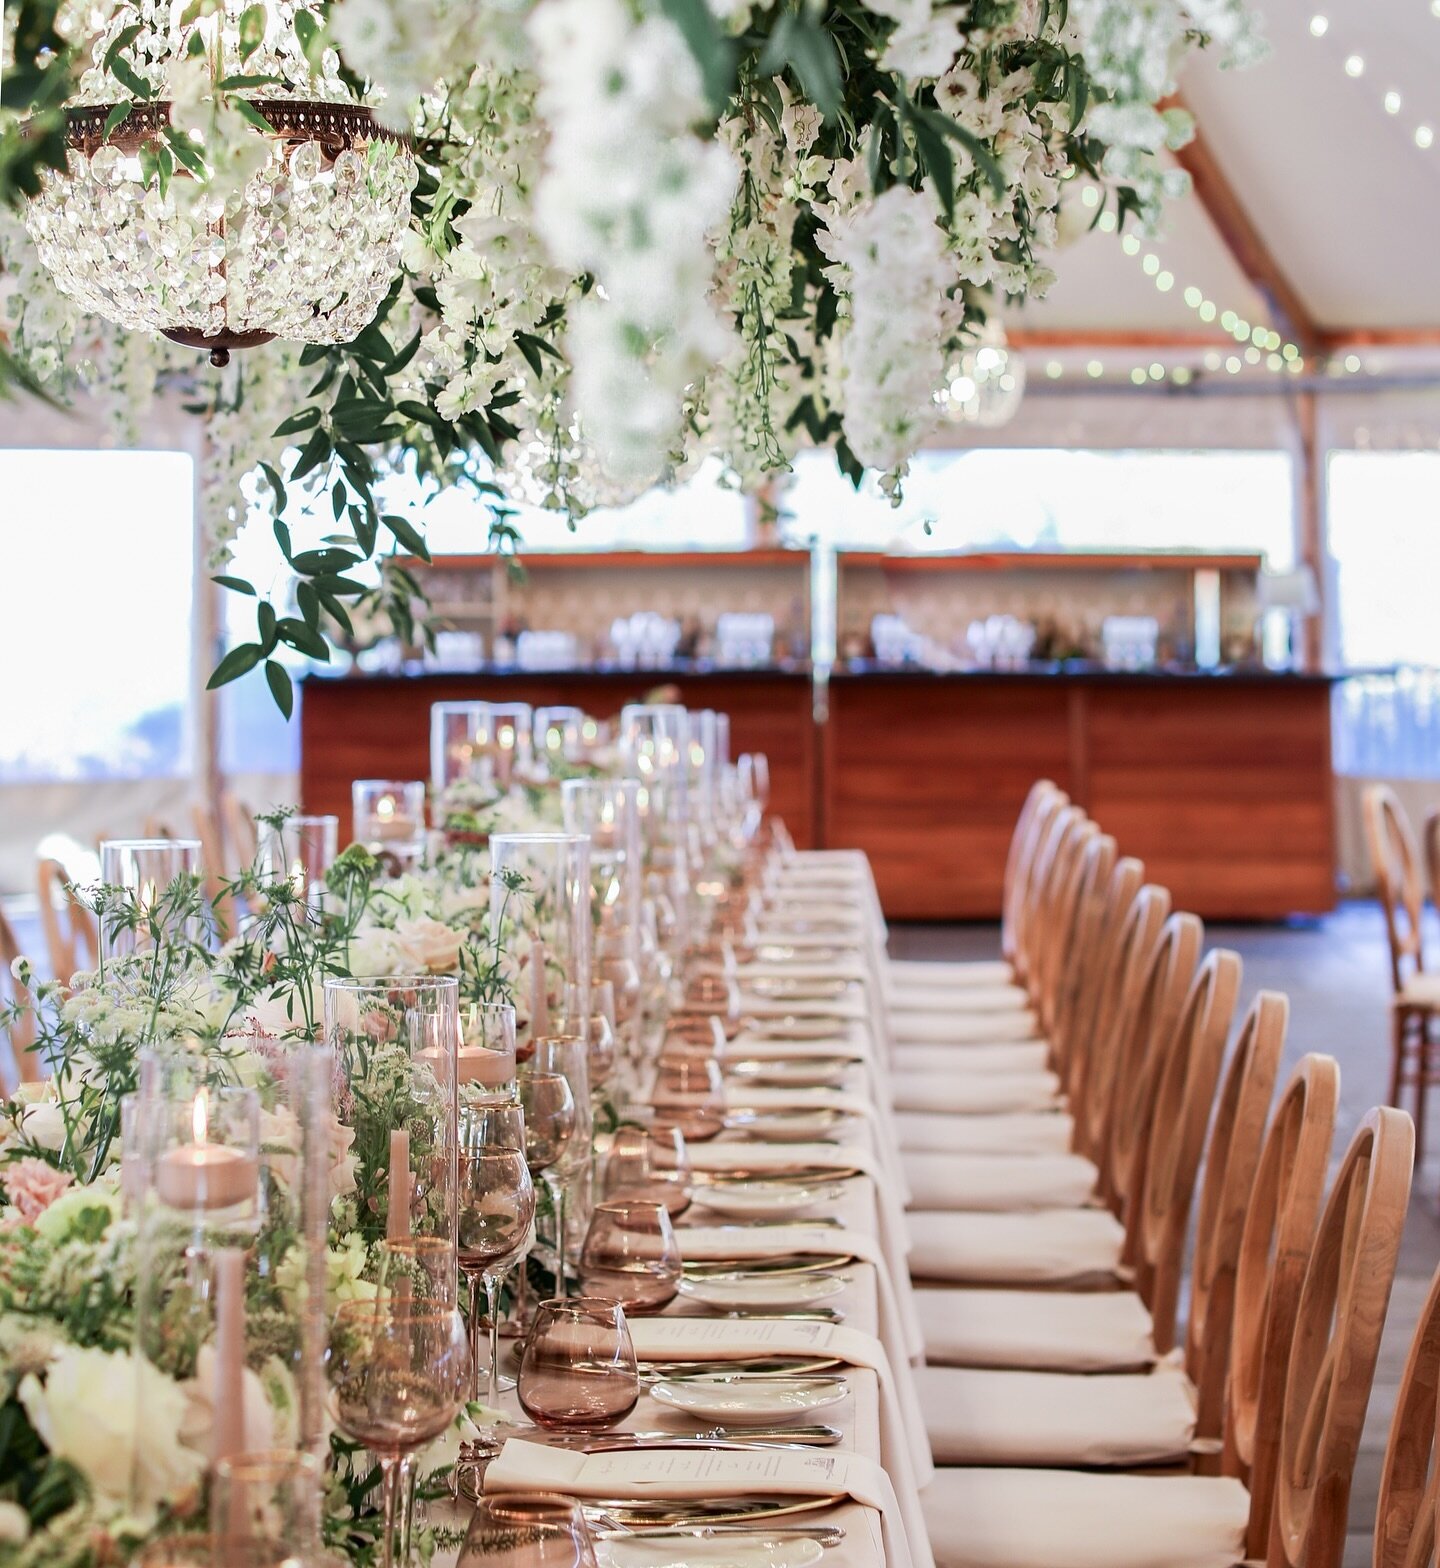 Pairing a tablescape of beautiful blooms with a trellis of hanging florals creates a breathtaking visual impact🌿It adds layers of beauty and dimension to the space, enhancing the atmosphere and creating a memorable setting. Add some timeless lightin